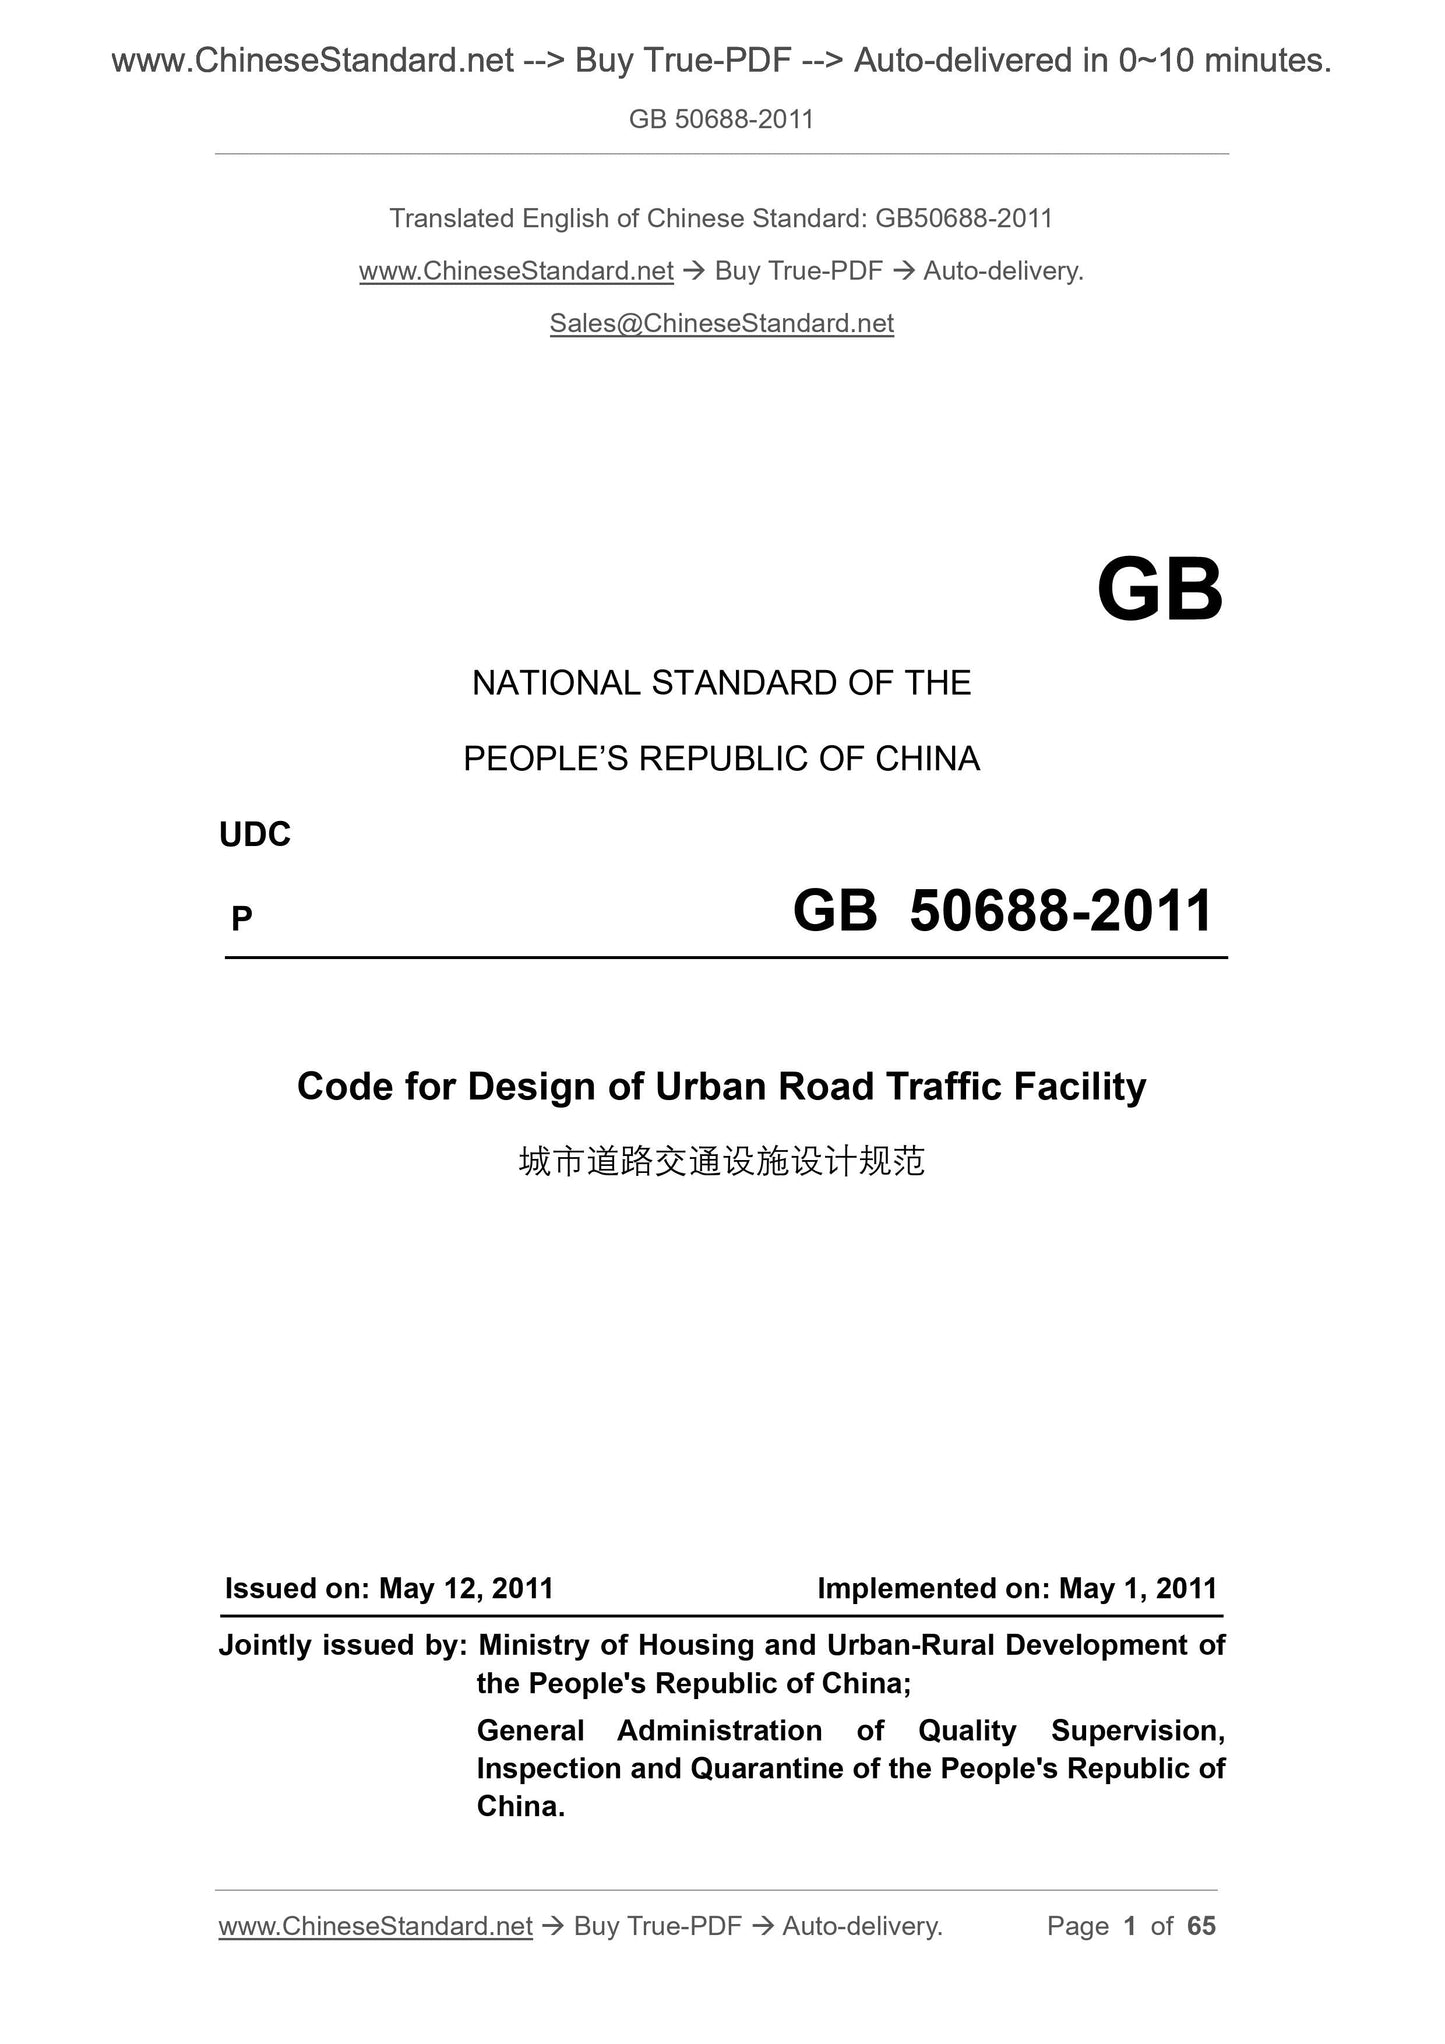 GB 50688-2011 Page 1